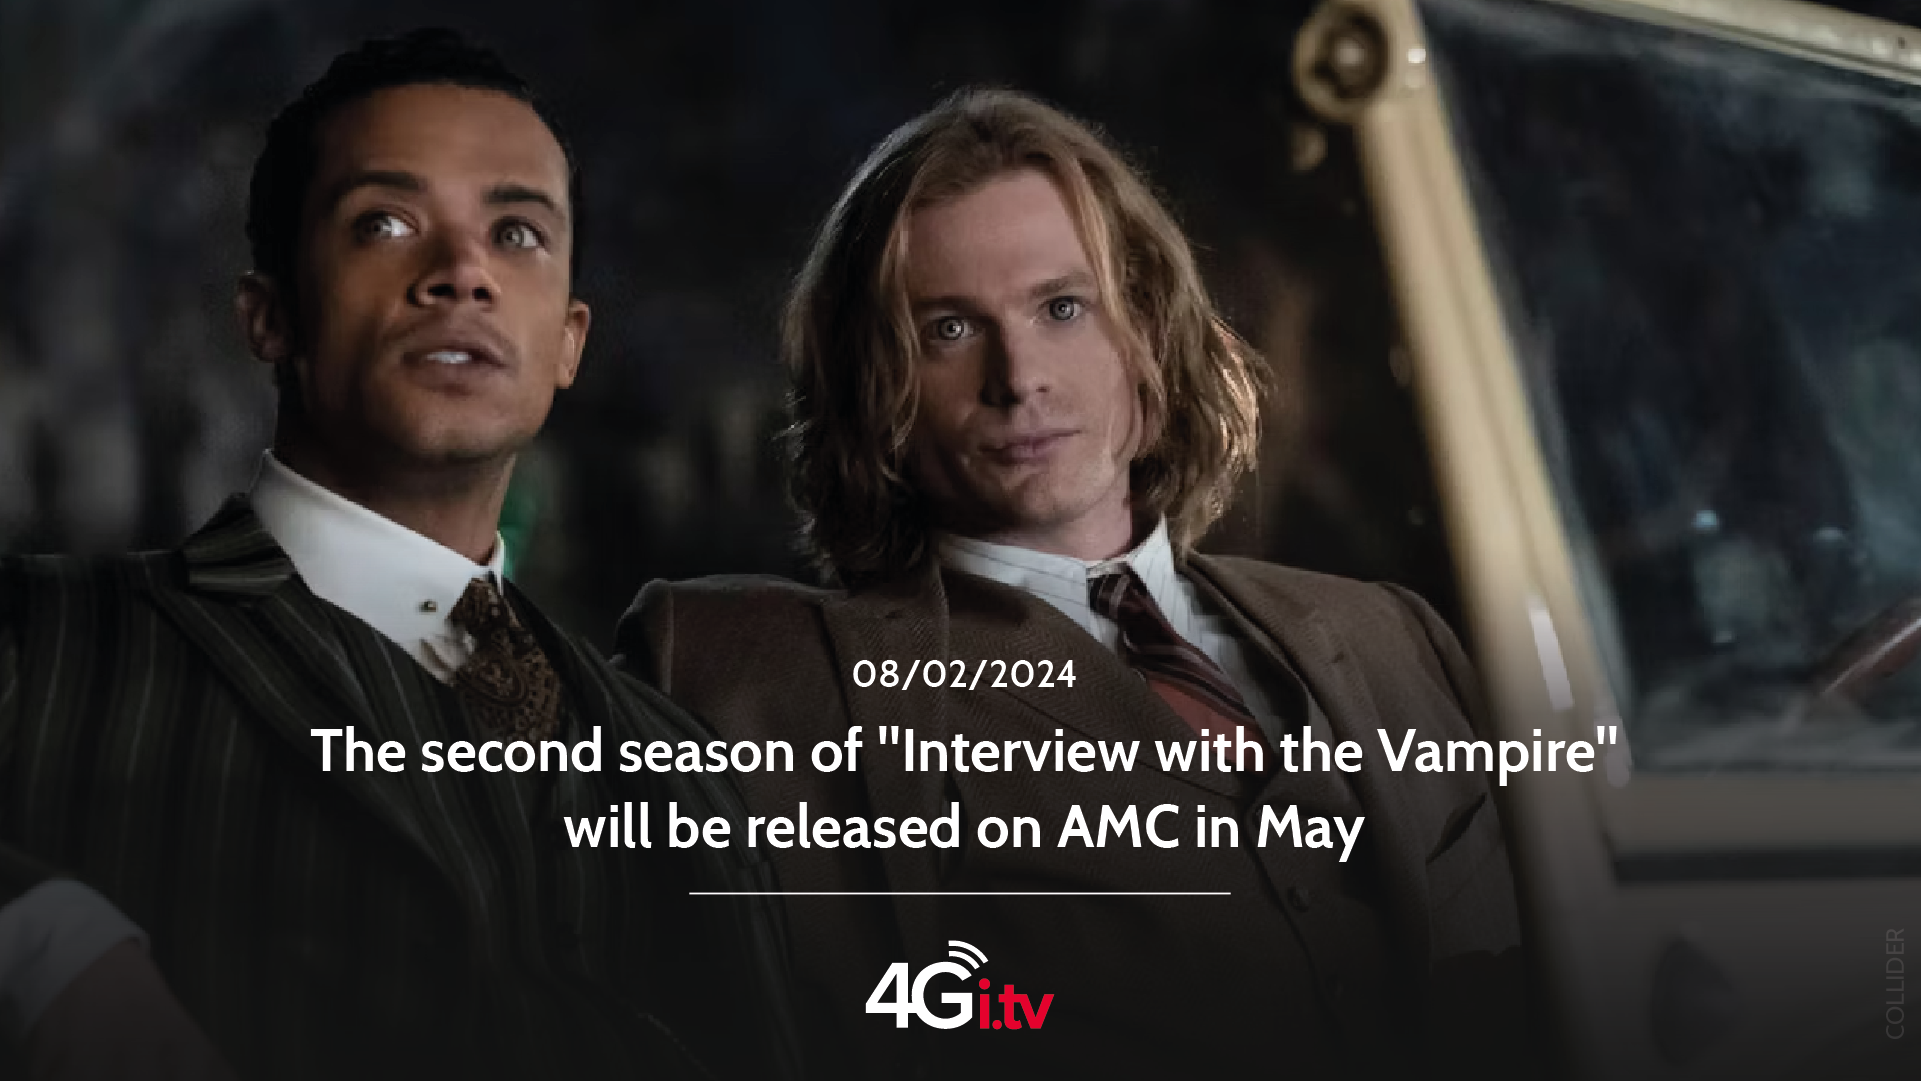 Lesen Sie mehr über den Artikel The second season of “Interview with the Vampire” will be released on AMC in May 